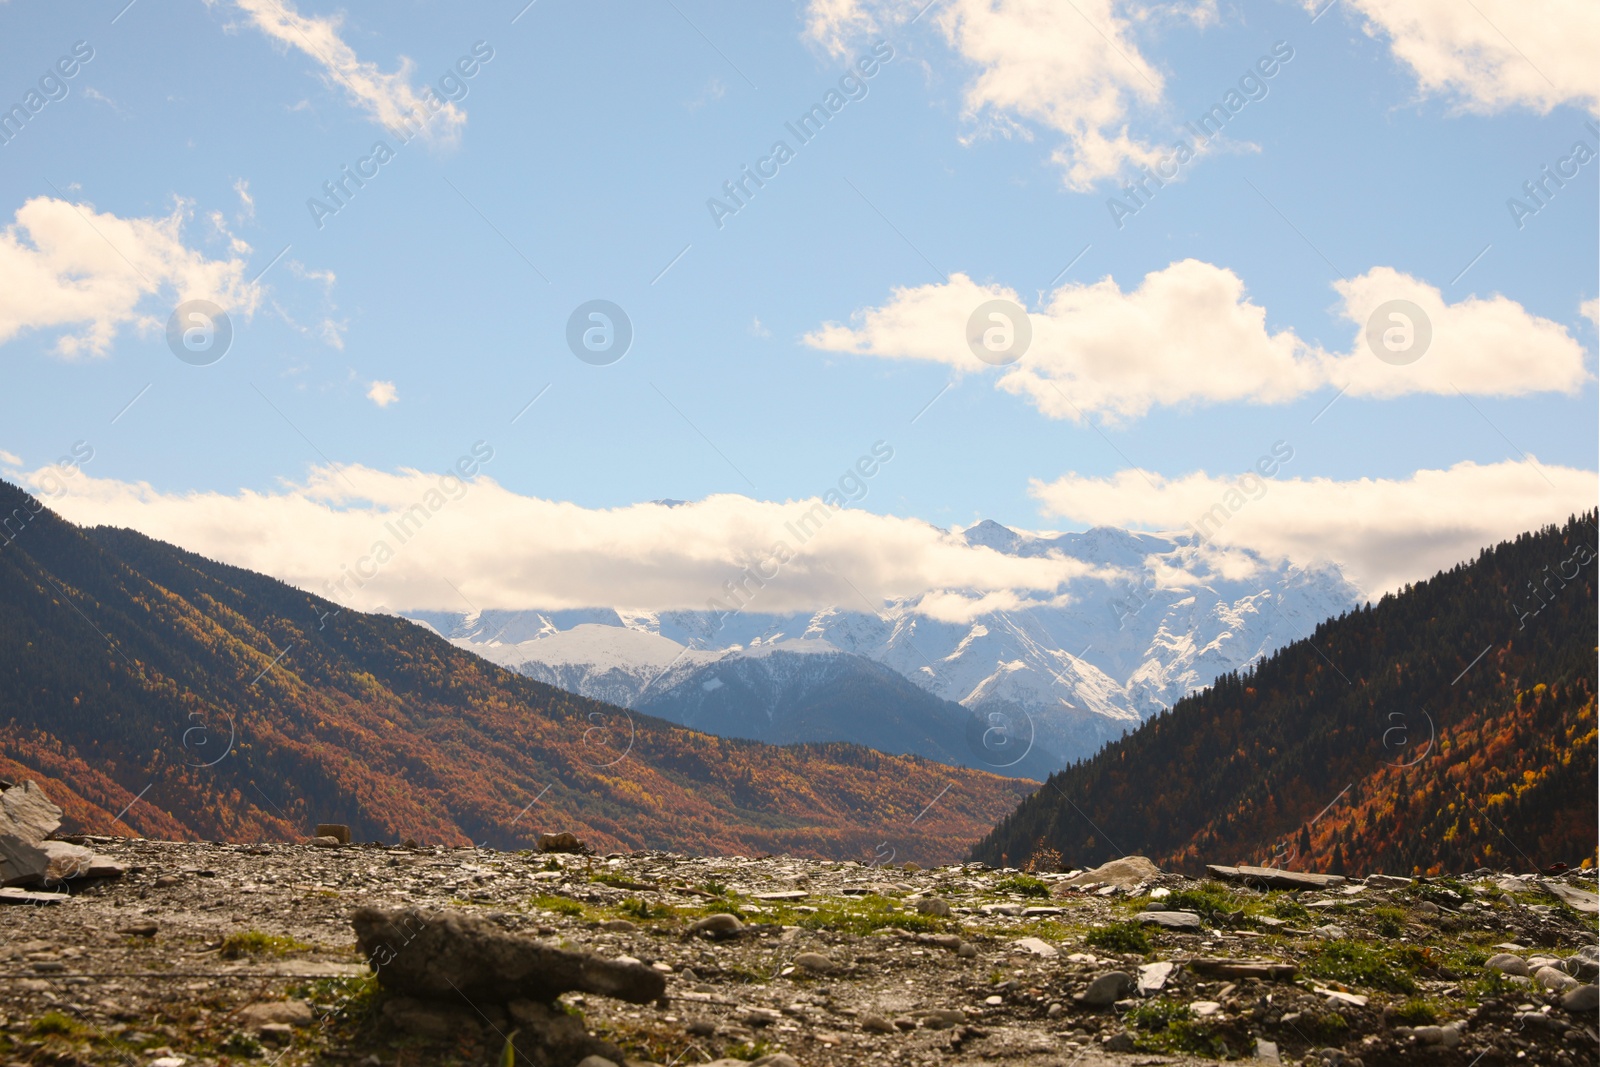 Photo of Picturesque landscape of high mountains with forest under blue cloudy sky